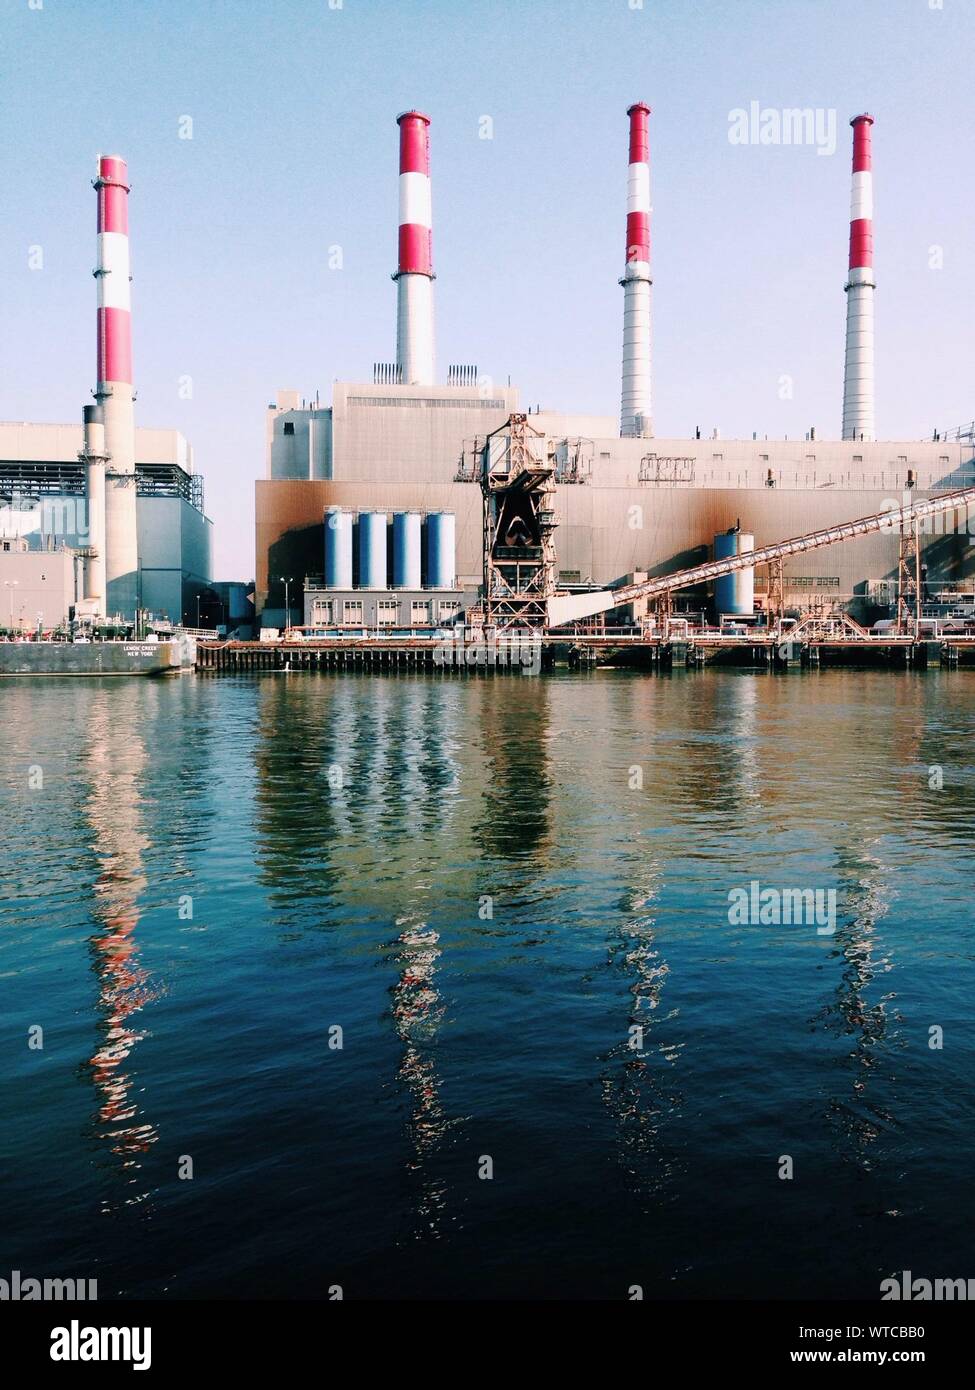 Exterior Of Factory With Smoke Stacks By River Stock Photo